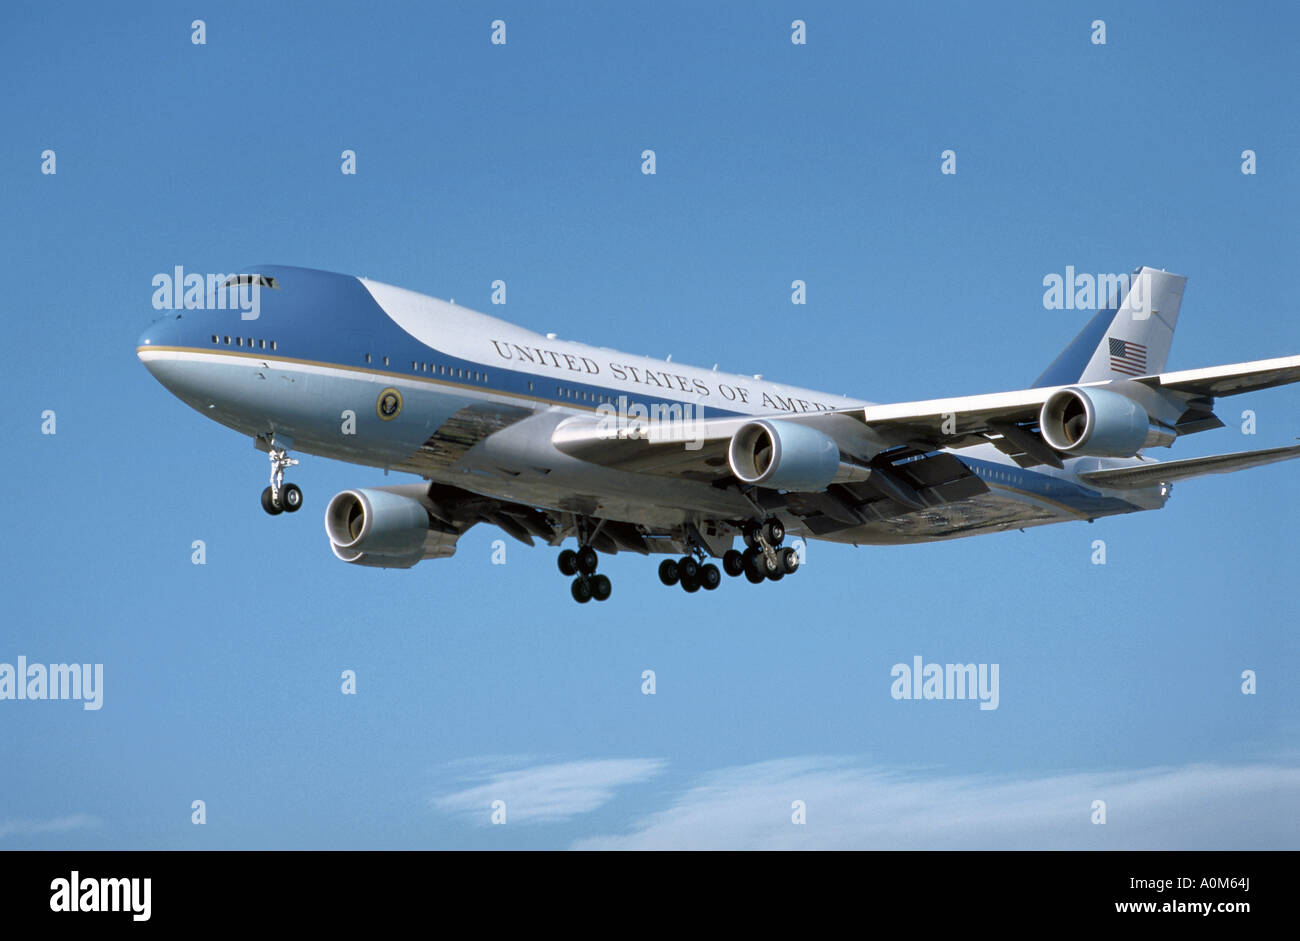 President George W. Bush onboard the Air Force One as it approaches touch down at Los Angeles International Airport, fall 2006 Stock Photo